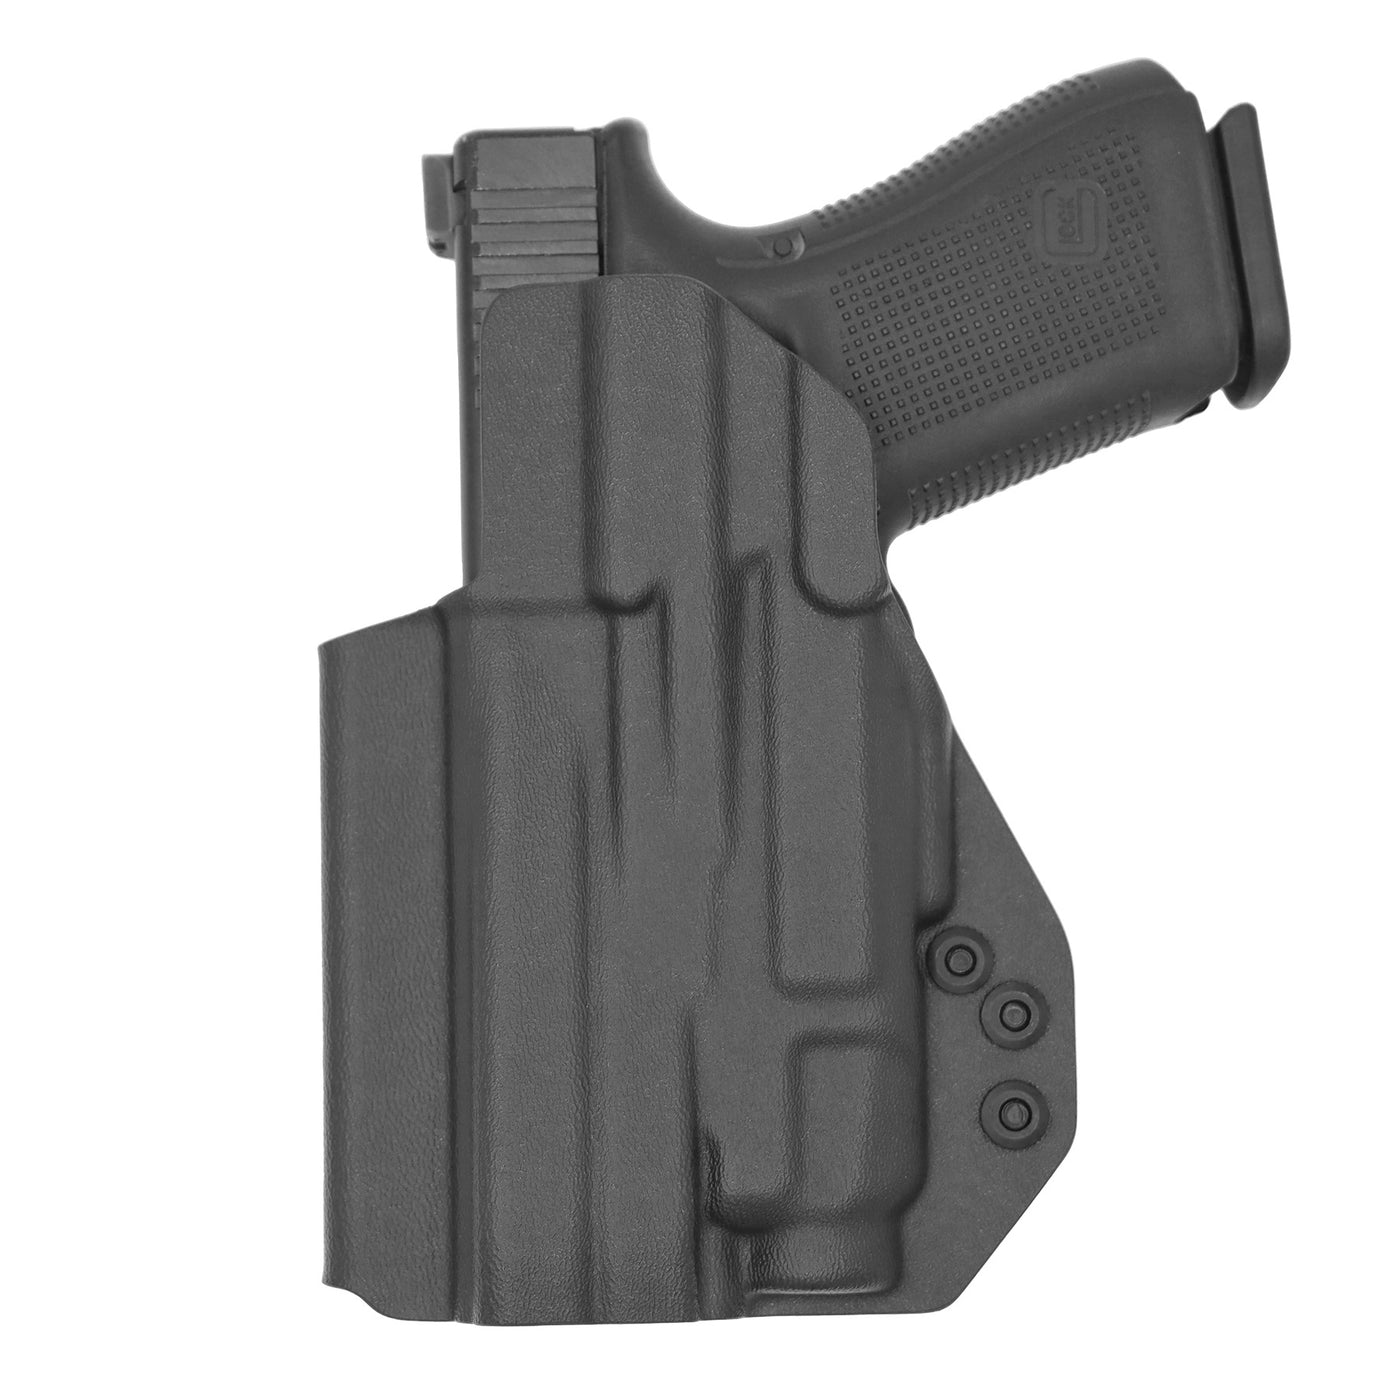 C&G Holsters Quickship IWB Tactical Glock 20/21 Streamlight TLR7/a in holstered position back view